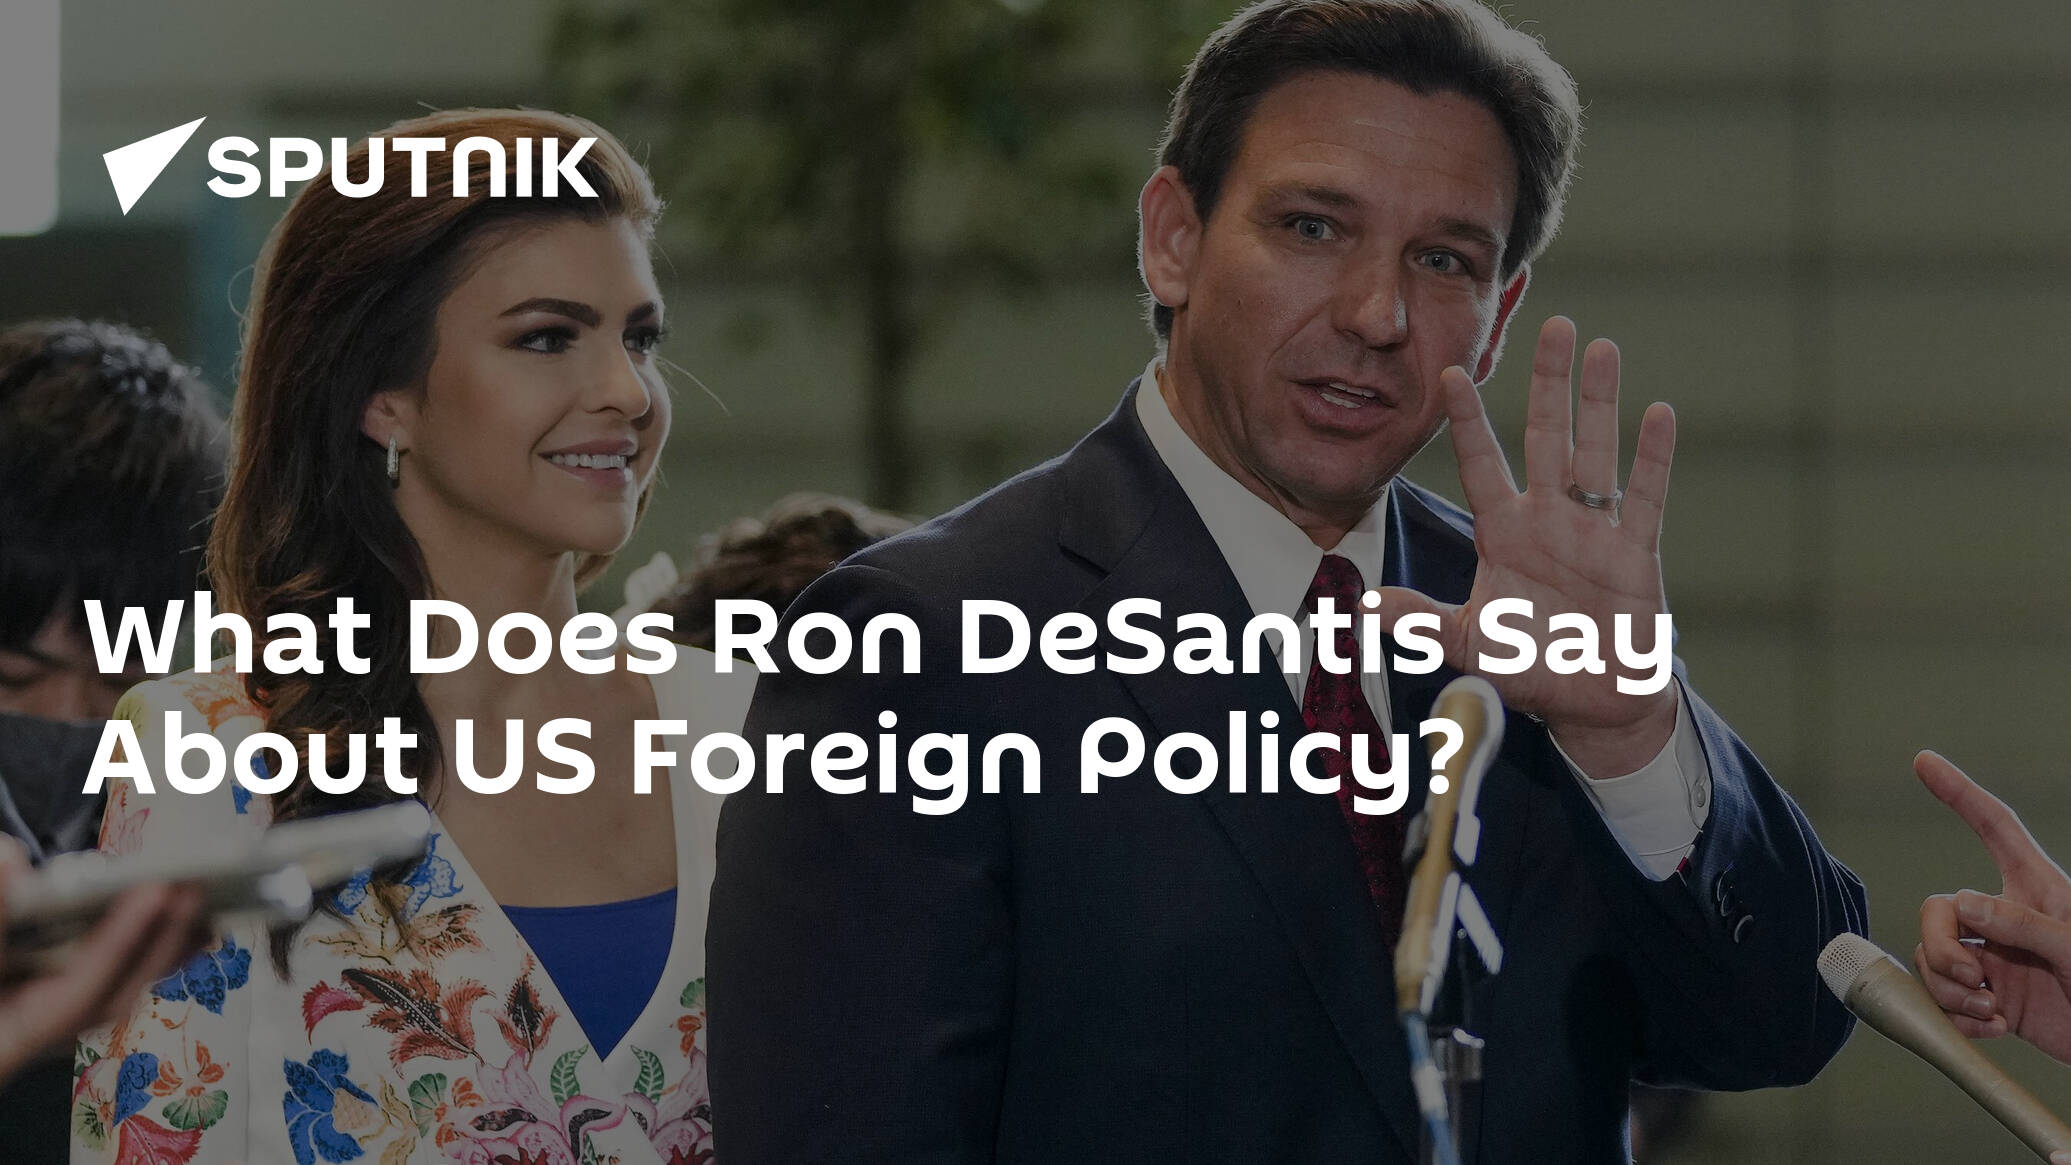 What Does Ron DeSantis Say About US Foreign Policy?